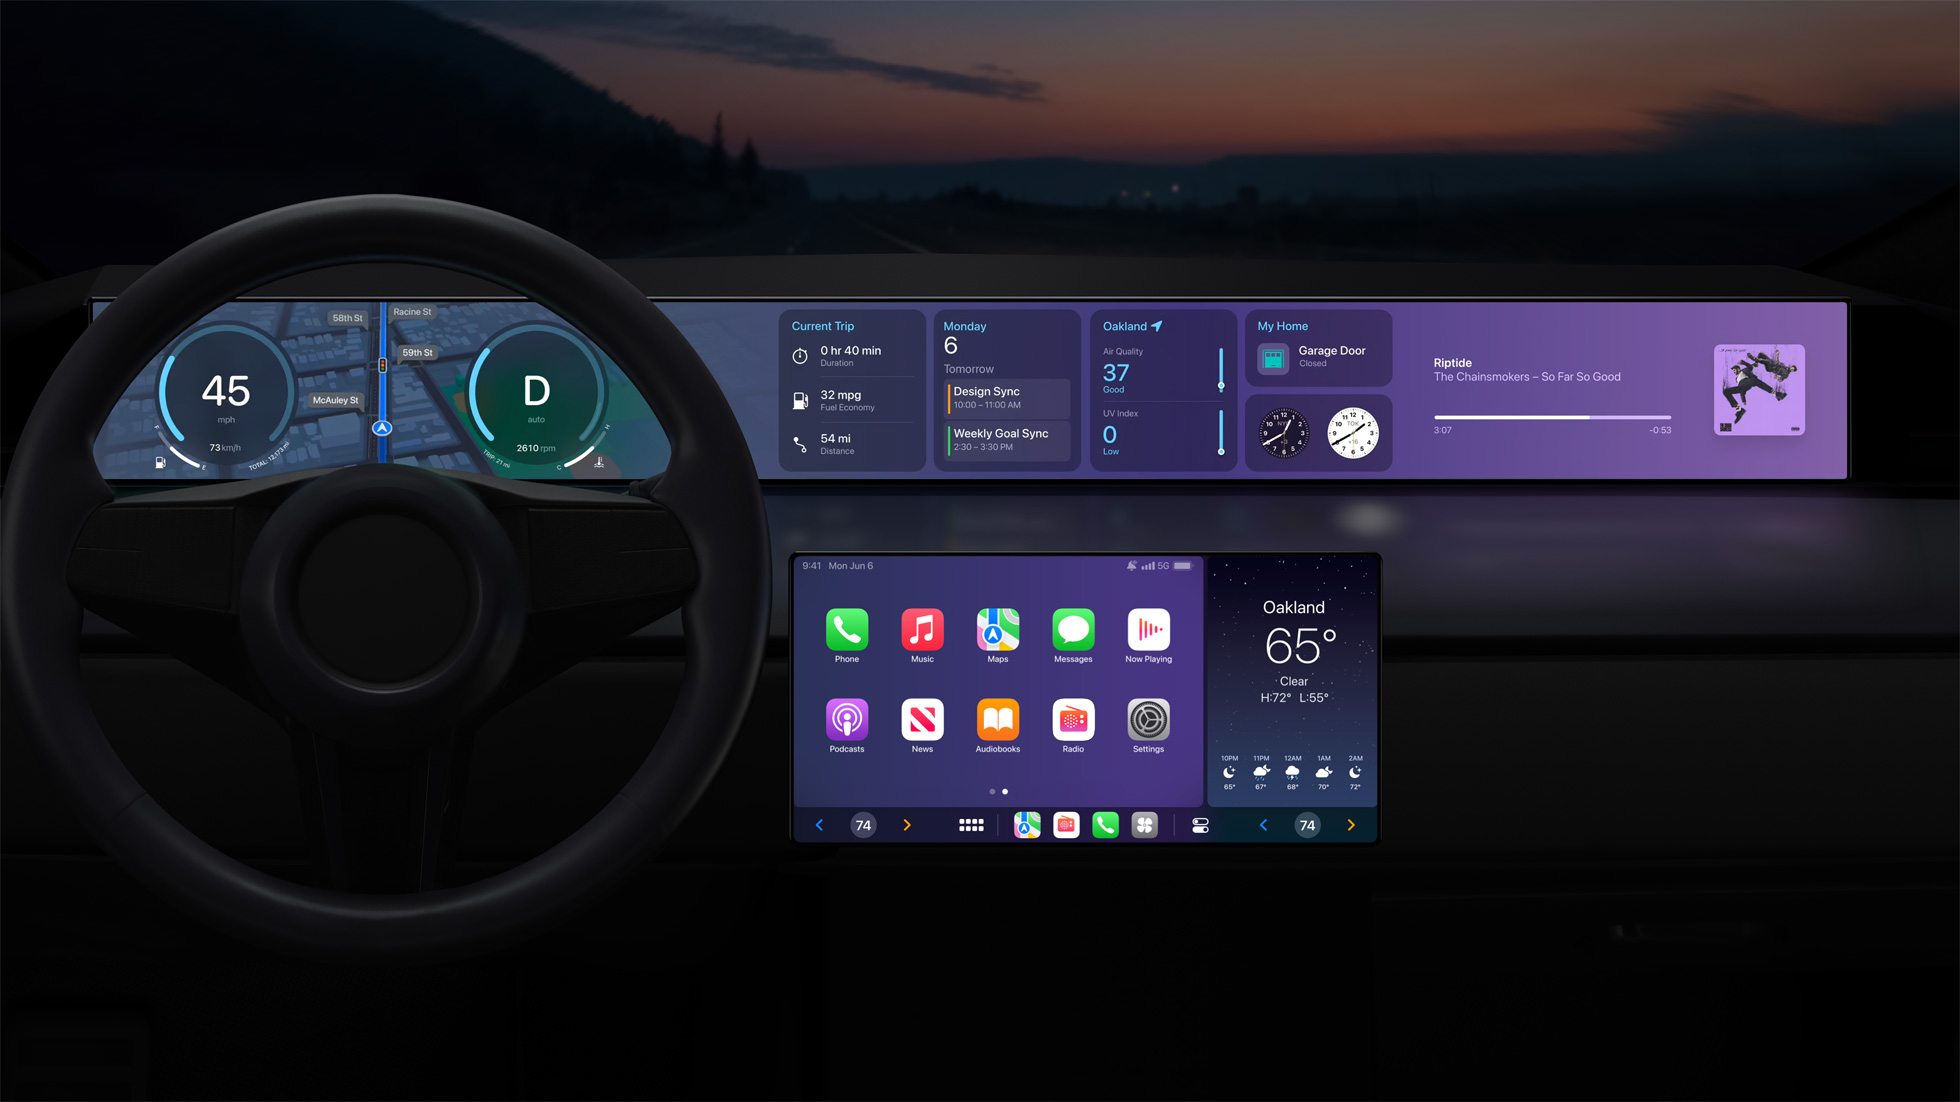 swift - CarPlay: Customize Now playing screen - Stack Overflow